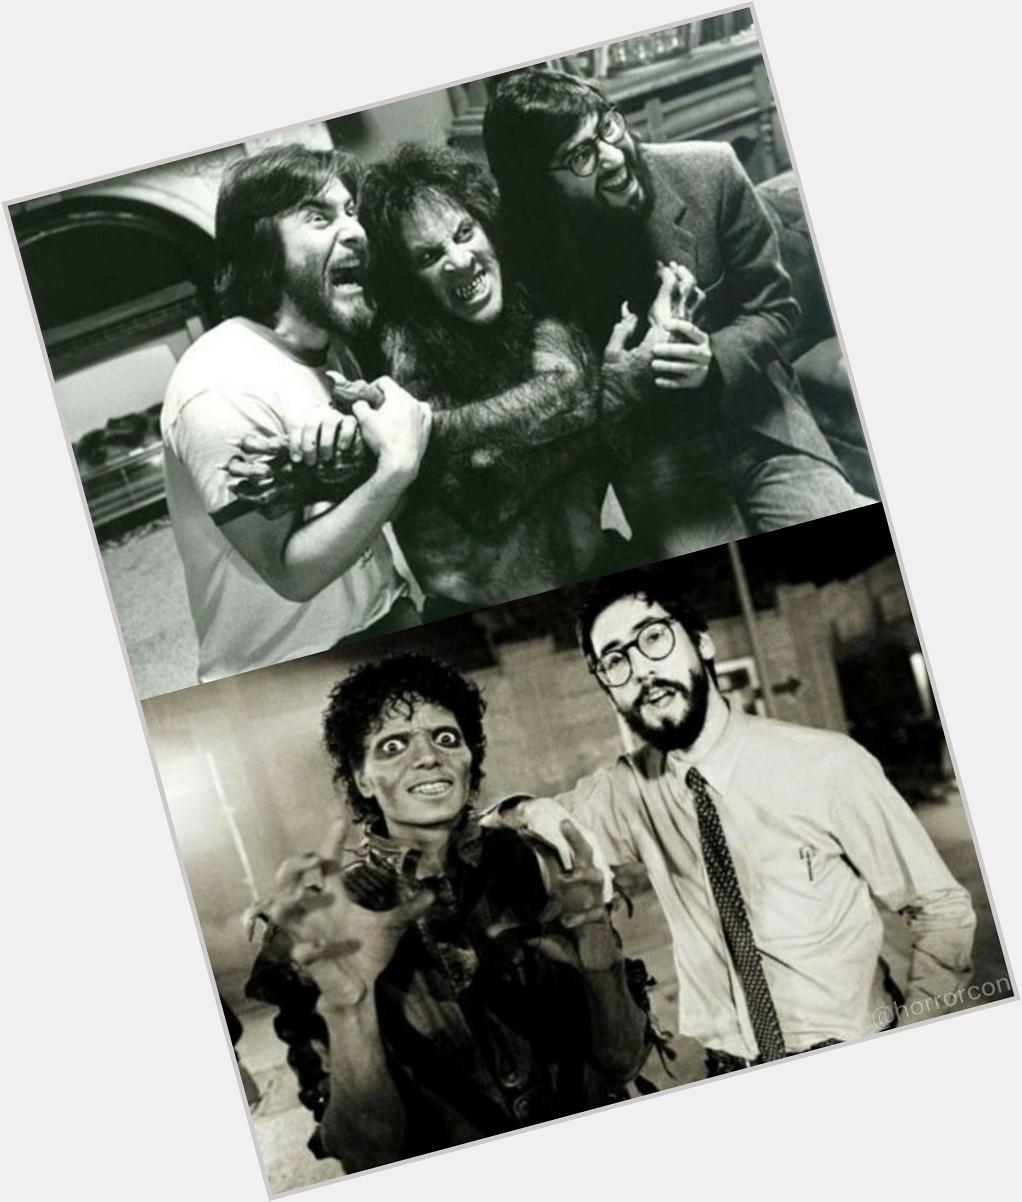 Happy Birthday to John Landis! Director of An American Werewolf in London and Thriller. Celebrates his 65th today. 